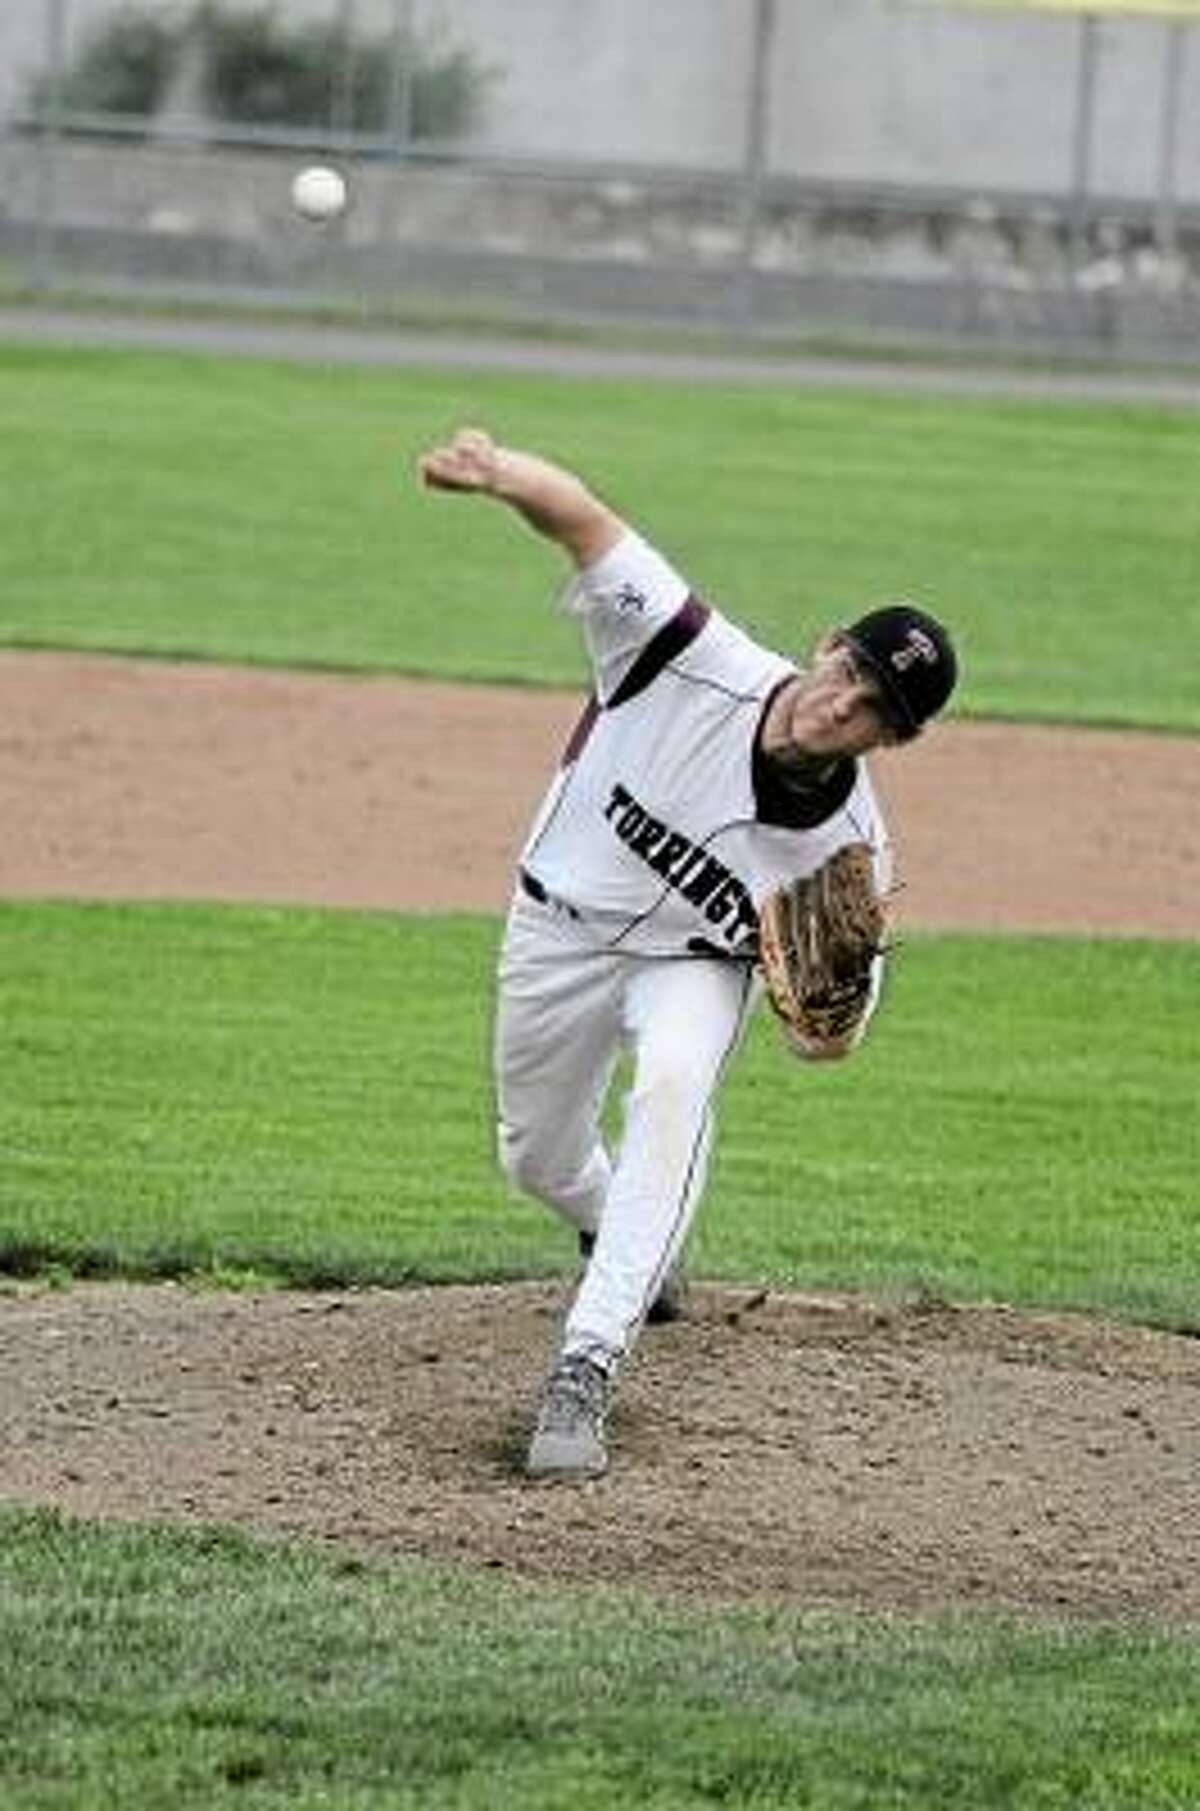 Torrington starting pitcher Kyle Sanford pitches a complete game against Litchfield. Photo by Sean Meenaghan/Register Citizen